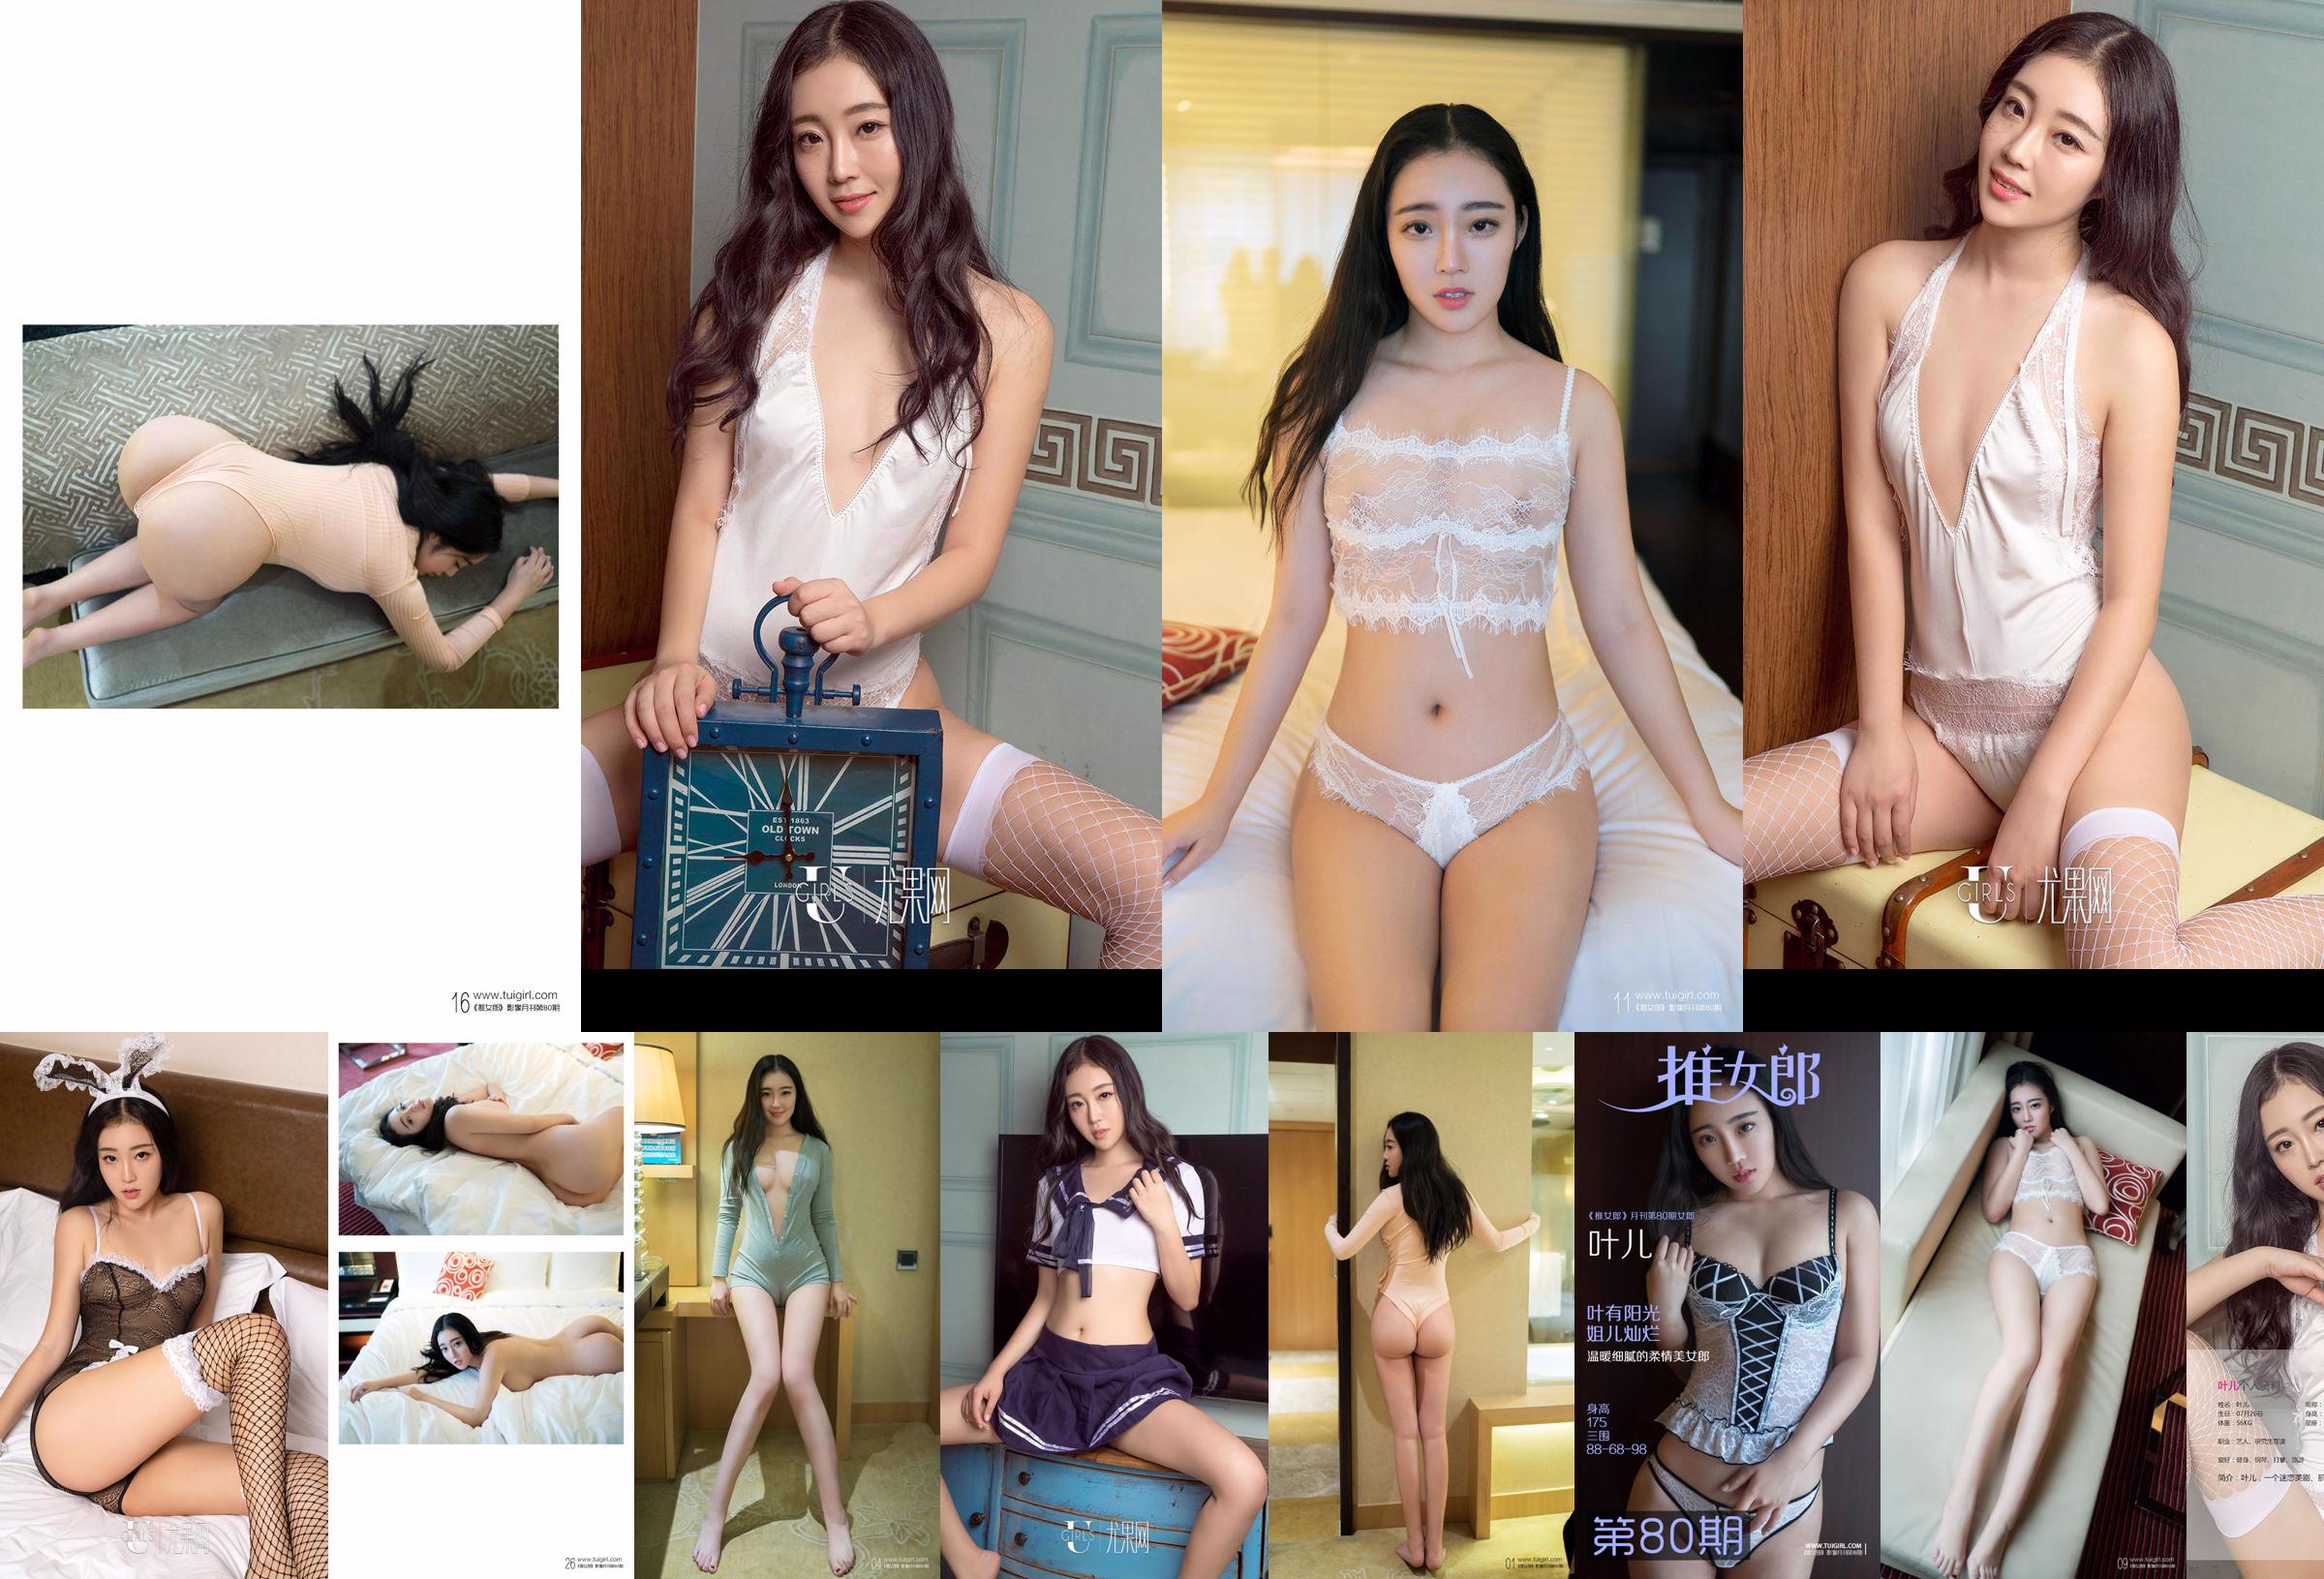 Ye Er "Time Beauty" [爱 优 物 Ugirls] No.459 No.9c456b Page 4